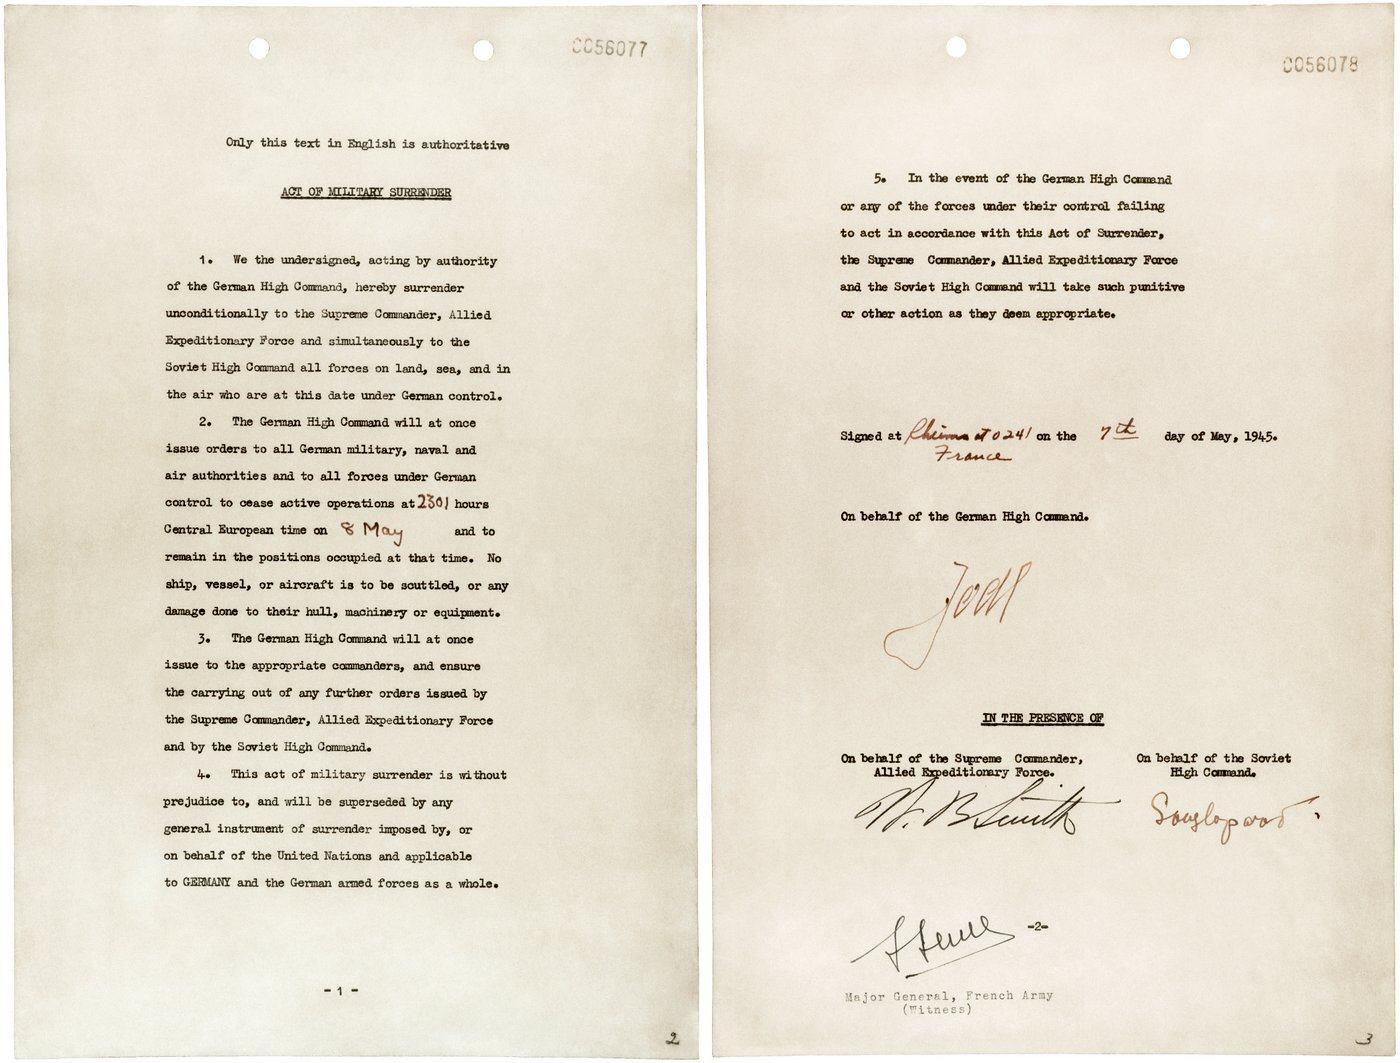 Photo of the German instrument of surrender